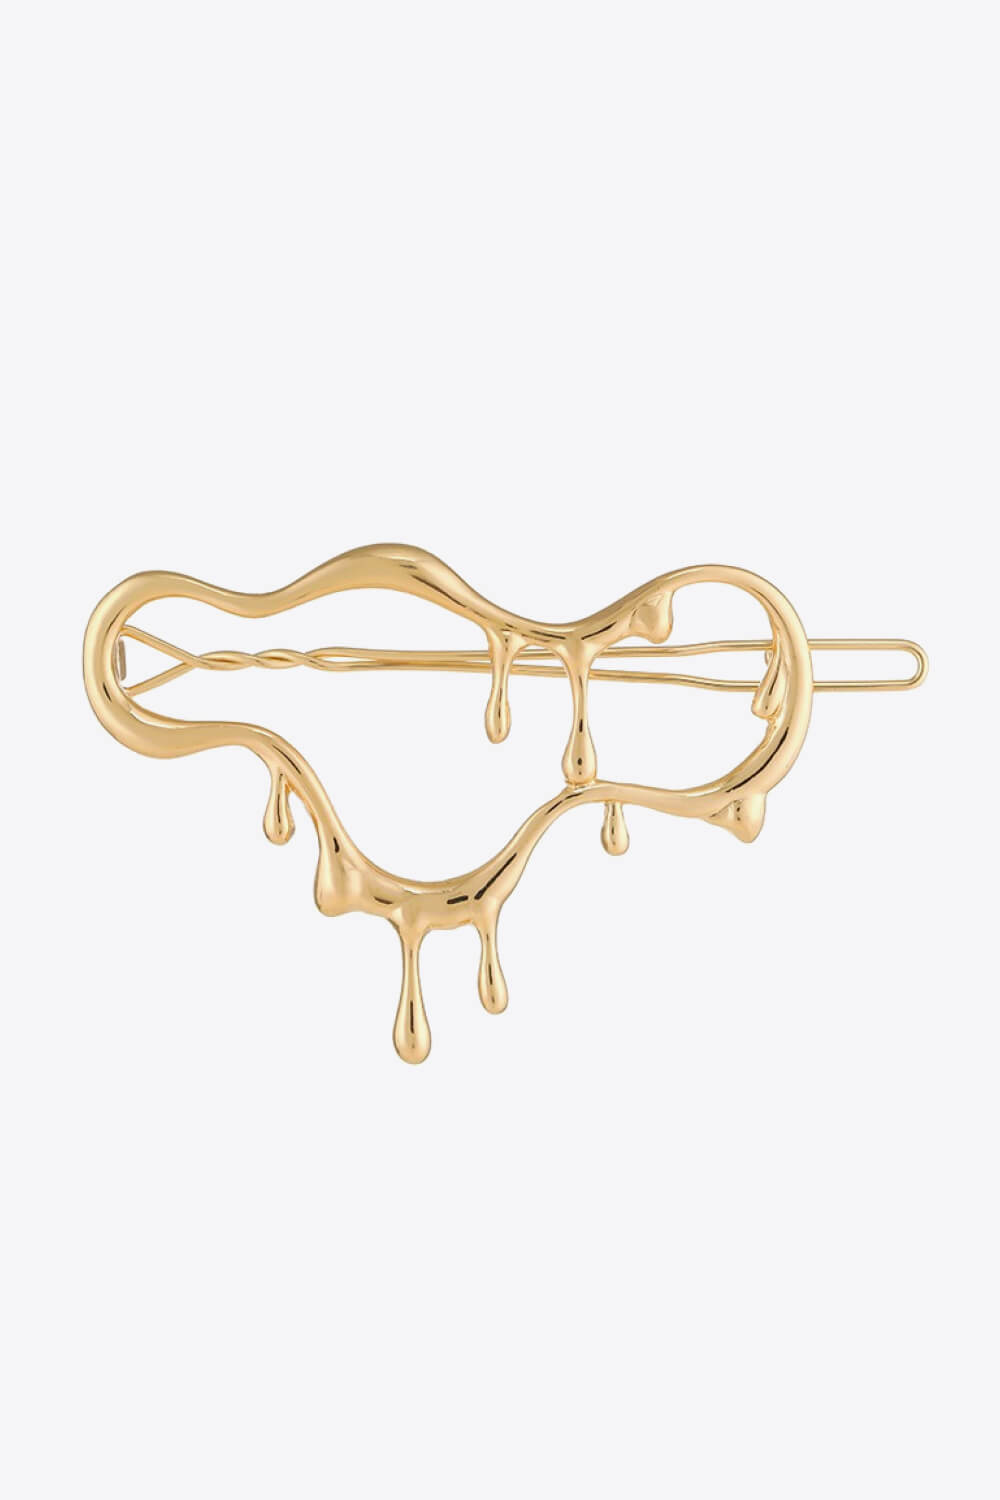 18K Gold Plated Hair Pin - Uylee's Boutique